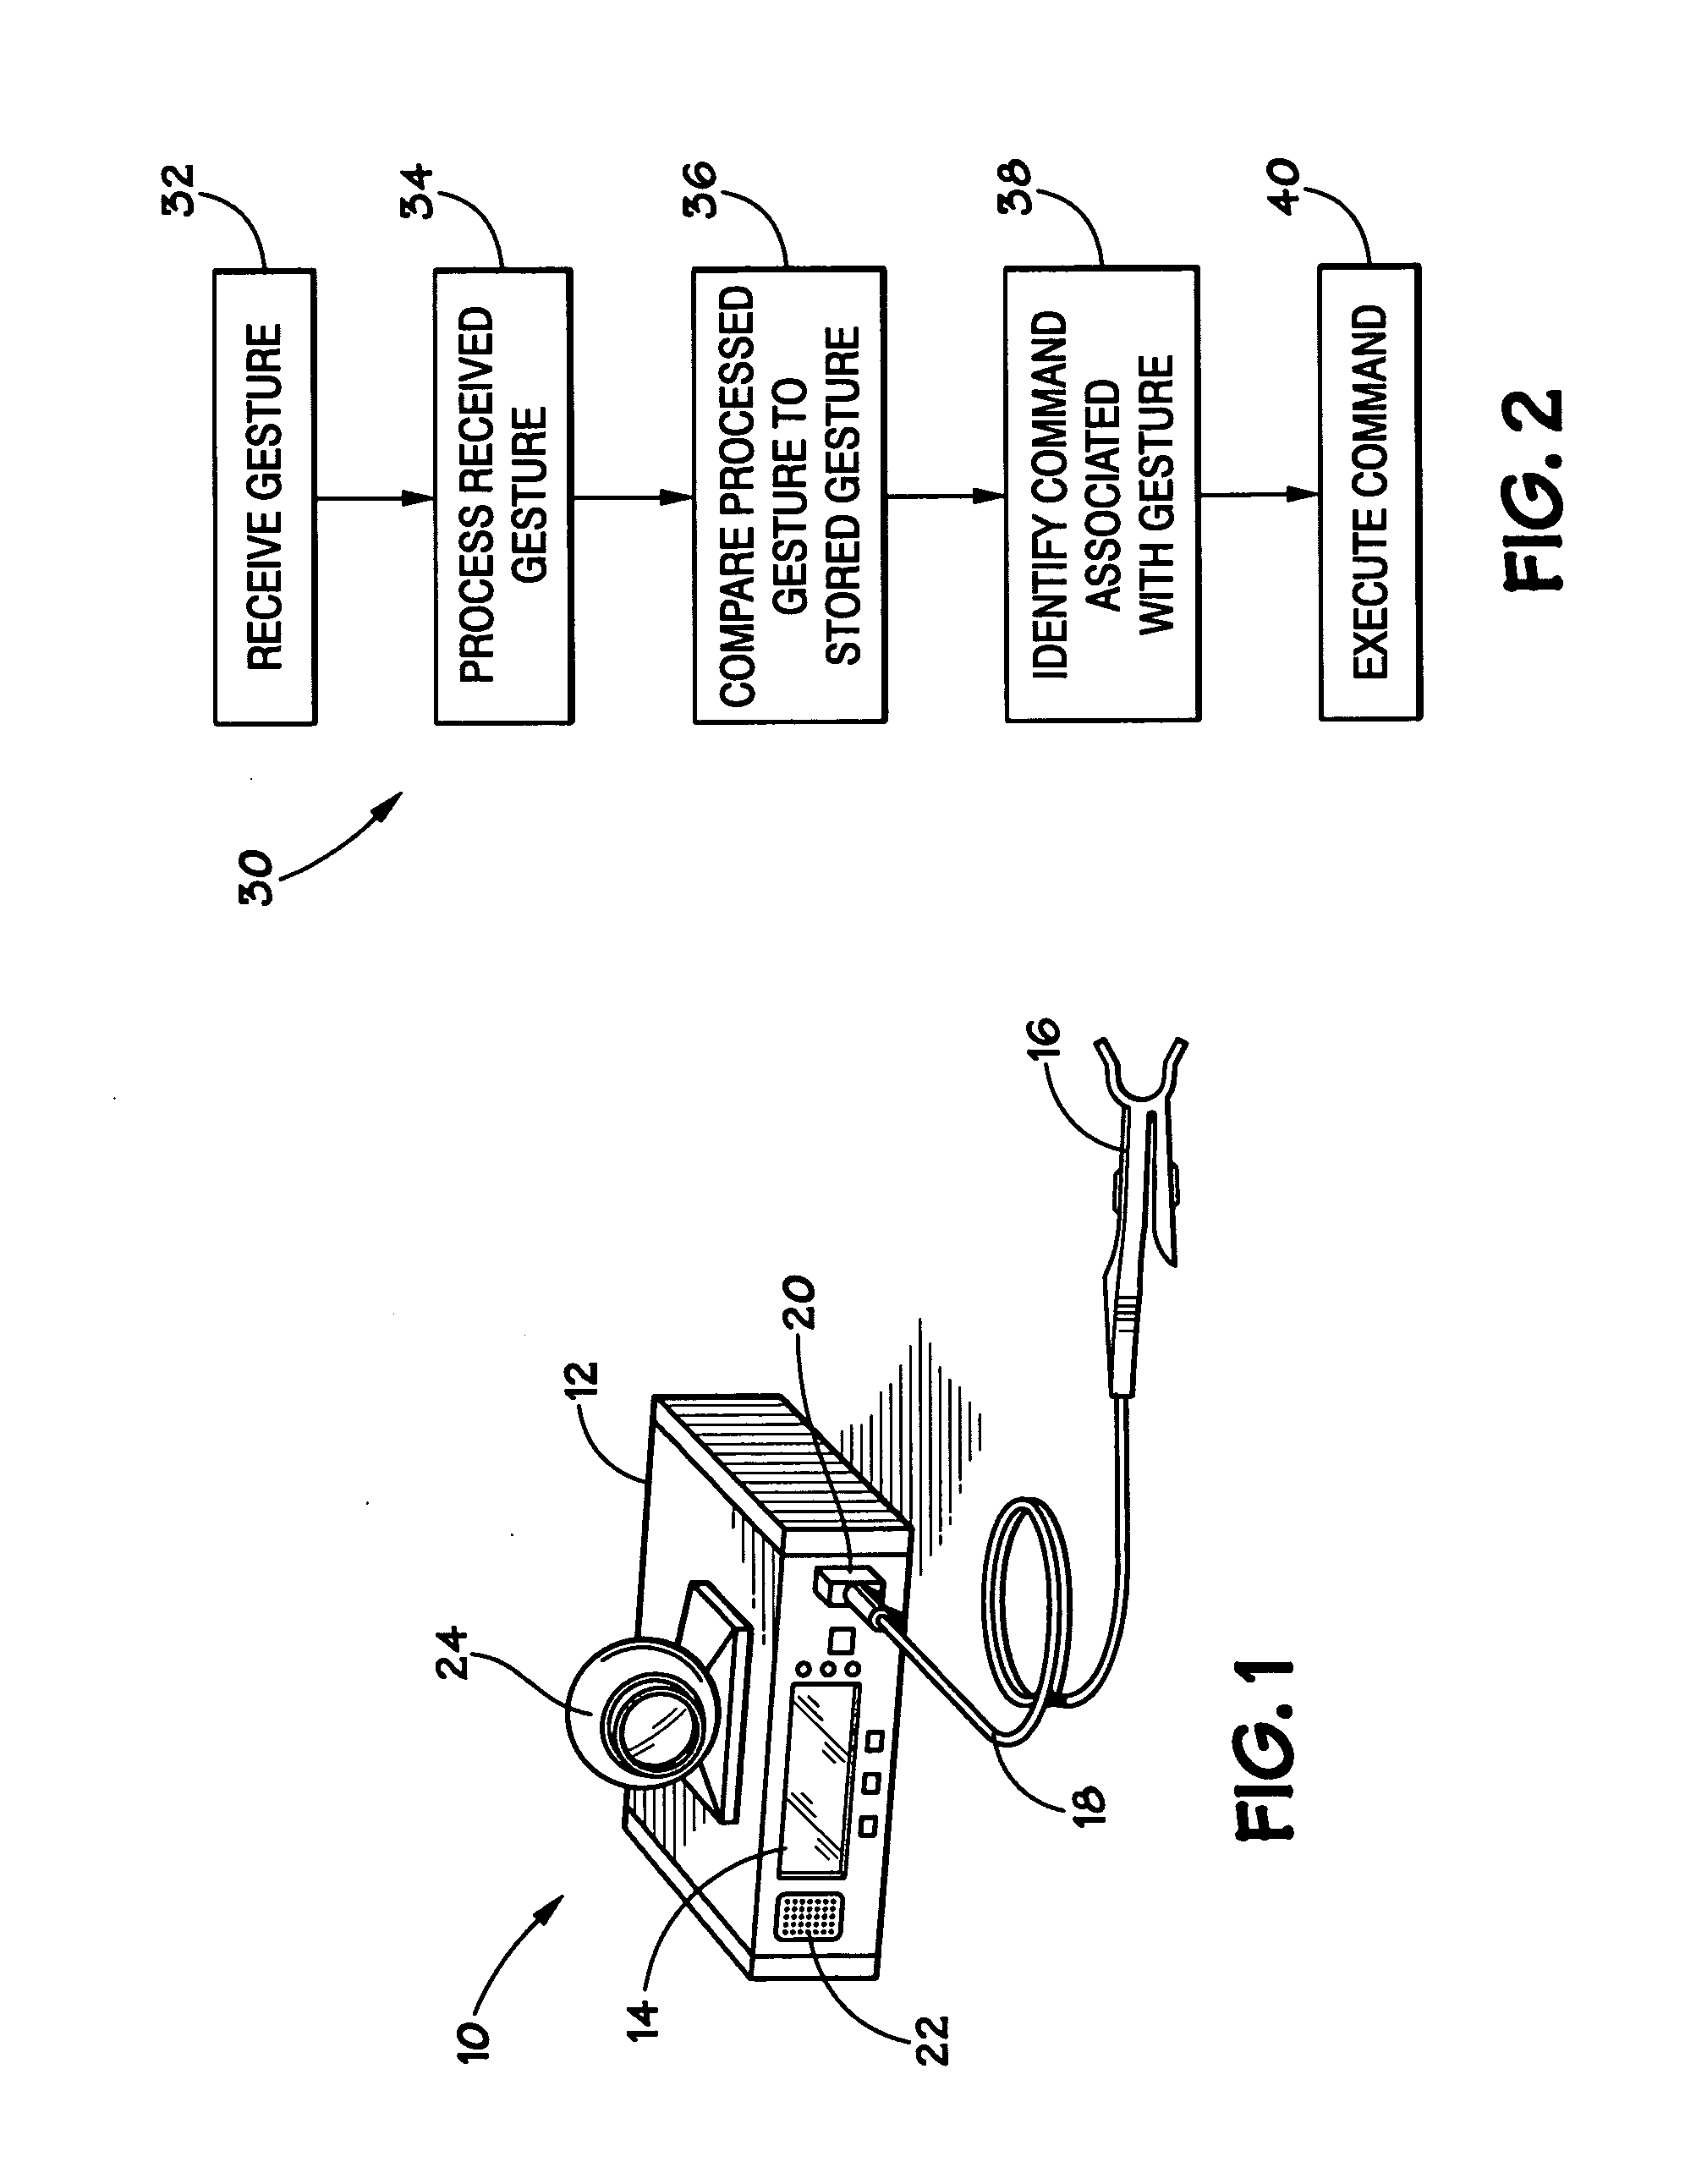 User interface and identification in a medical device system and method